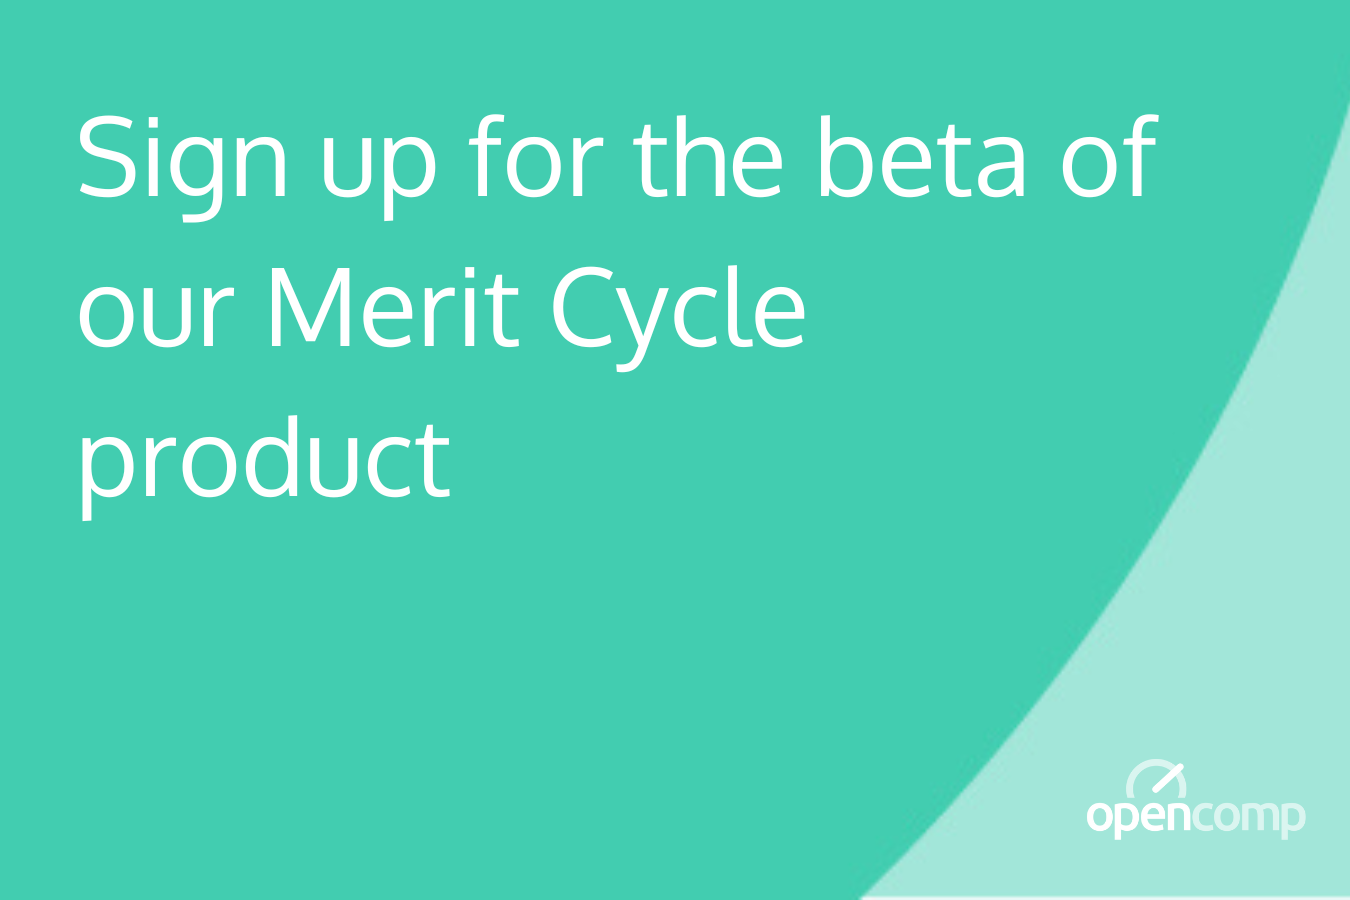 Sign up for the beta of our Merit Cycle product